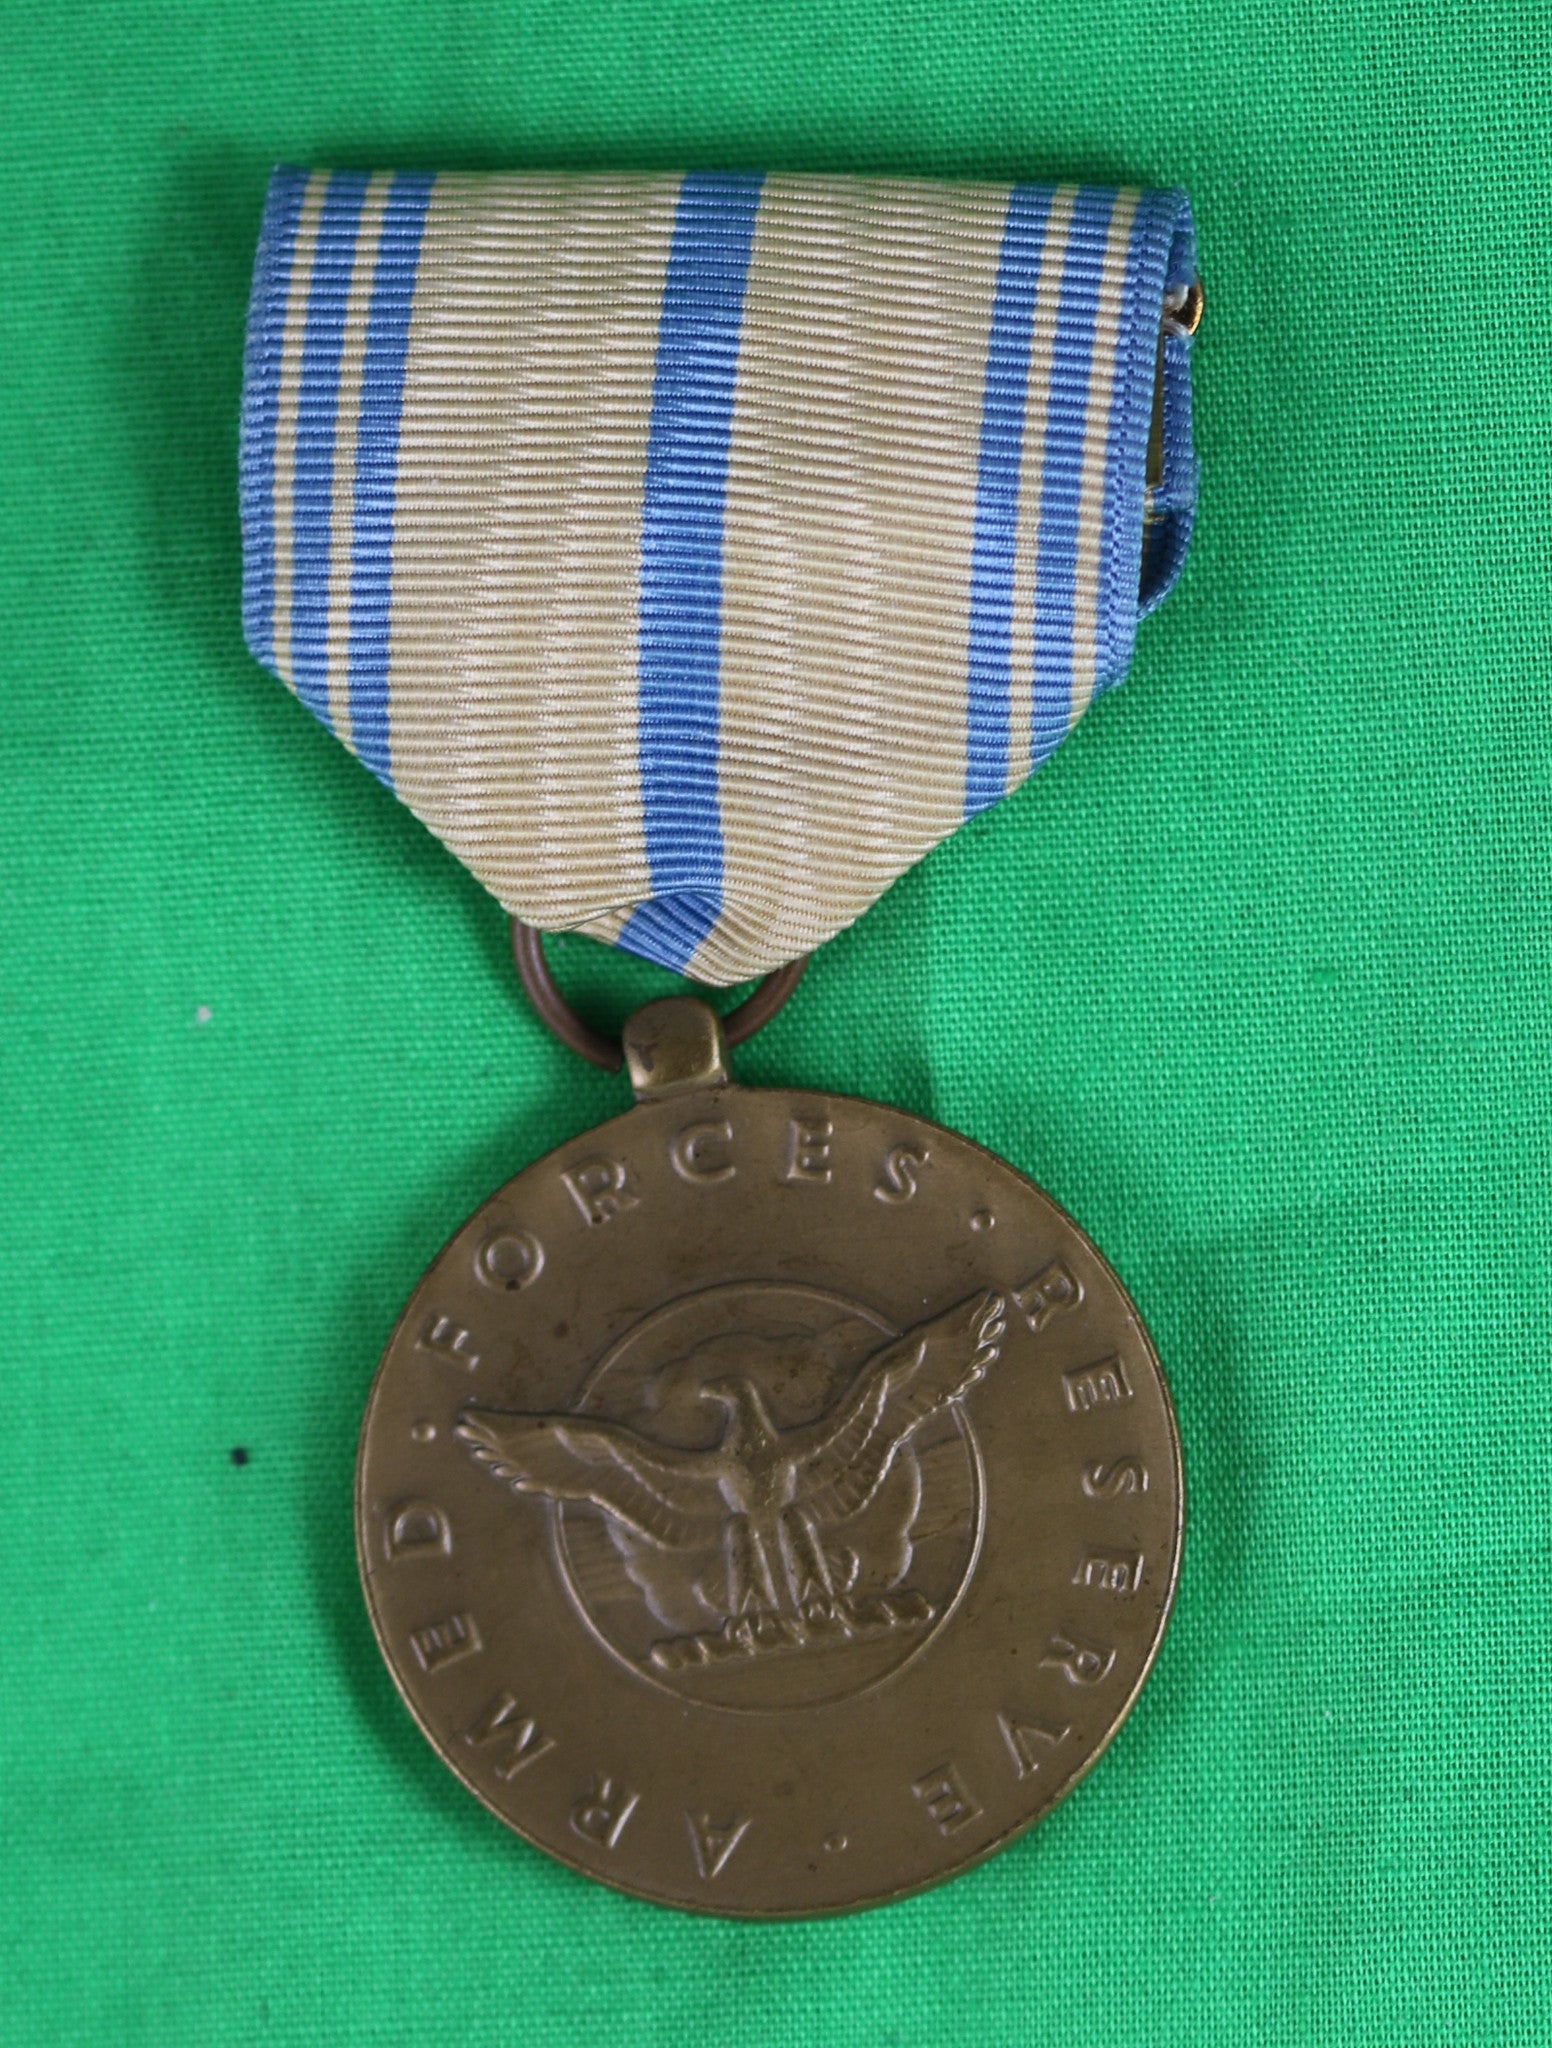 Armed Forces Reserve Medal - Air Force